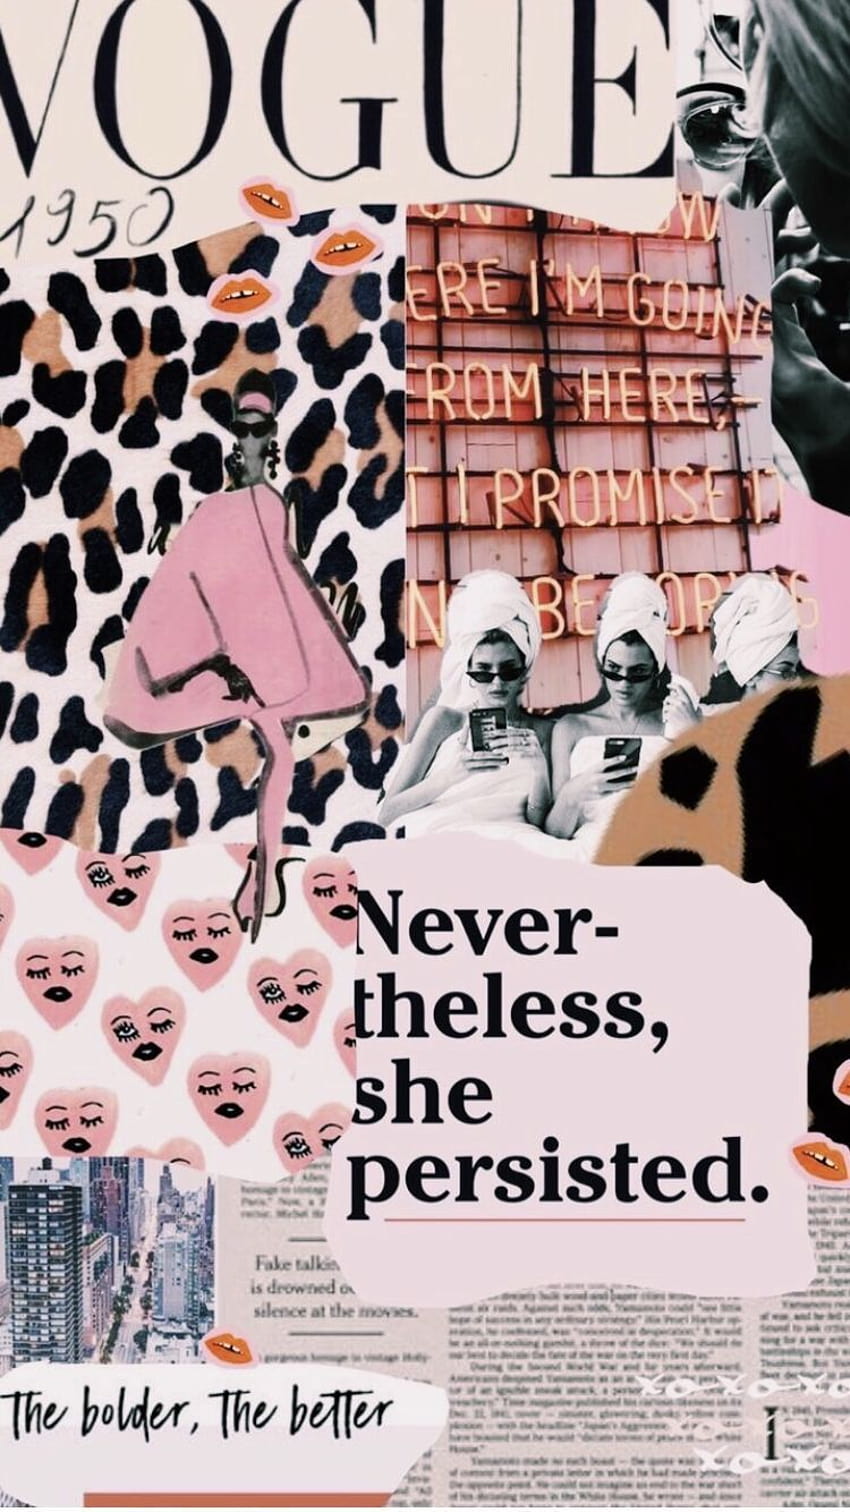 A collage of images including a Vogue magazine cover, a woman on a magazine cover, and a quote that says 